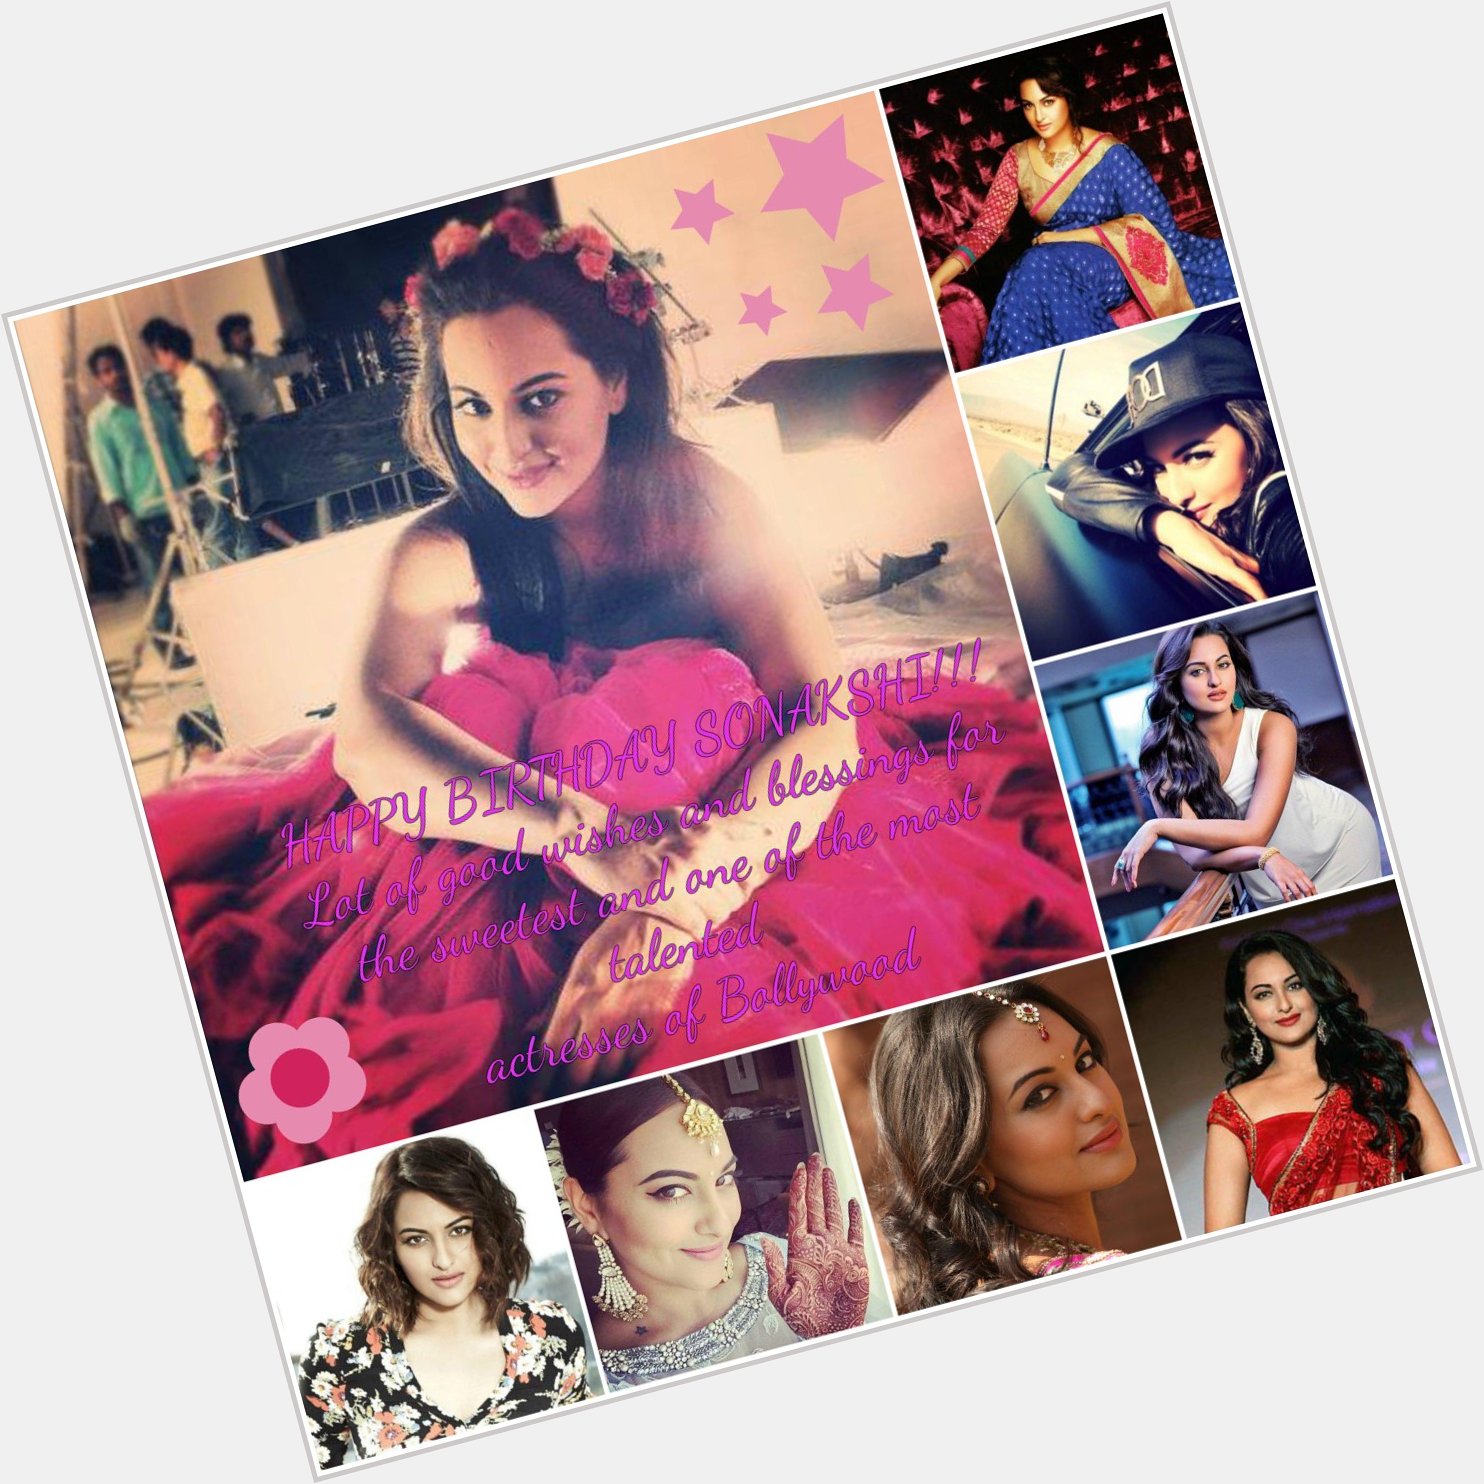 Happy Birthday Sonakshi Sinha Lot of blessings and happiness for our queen :D Have a nice day ! 